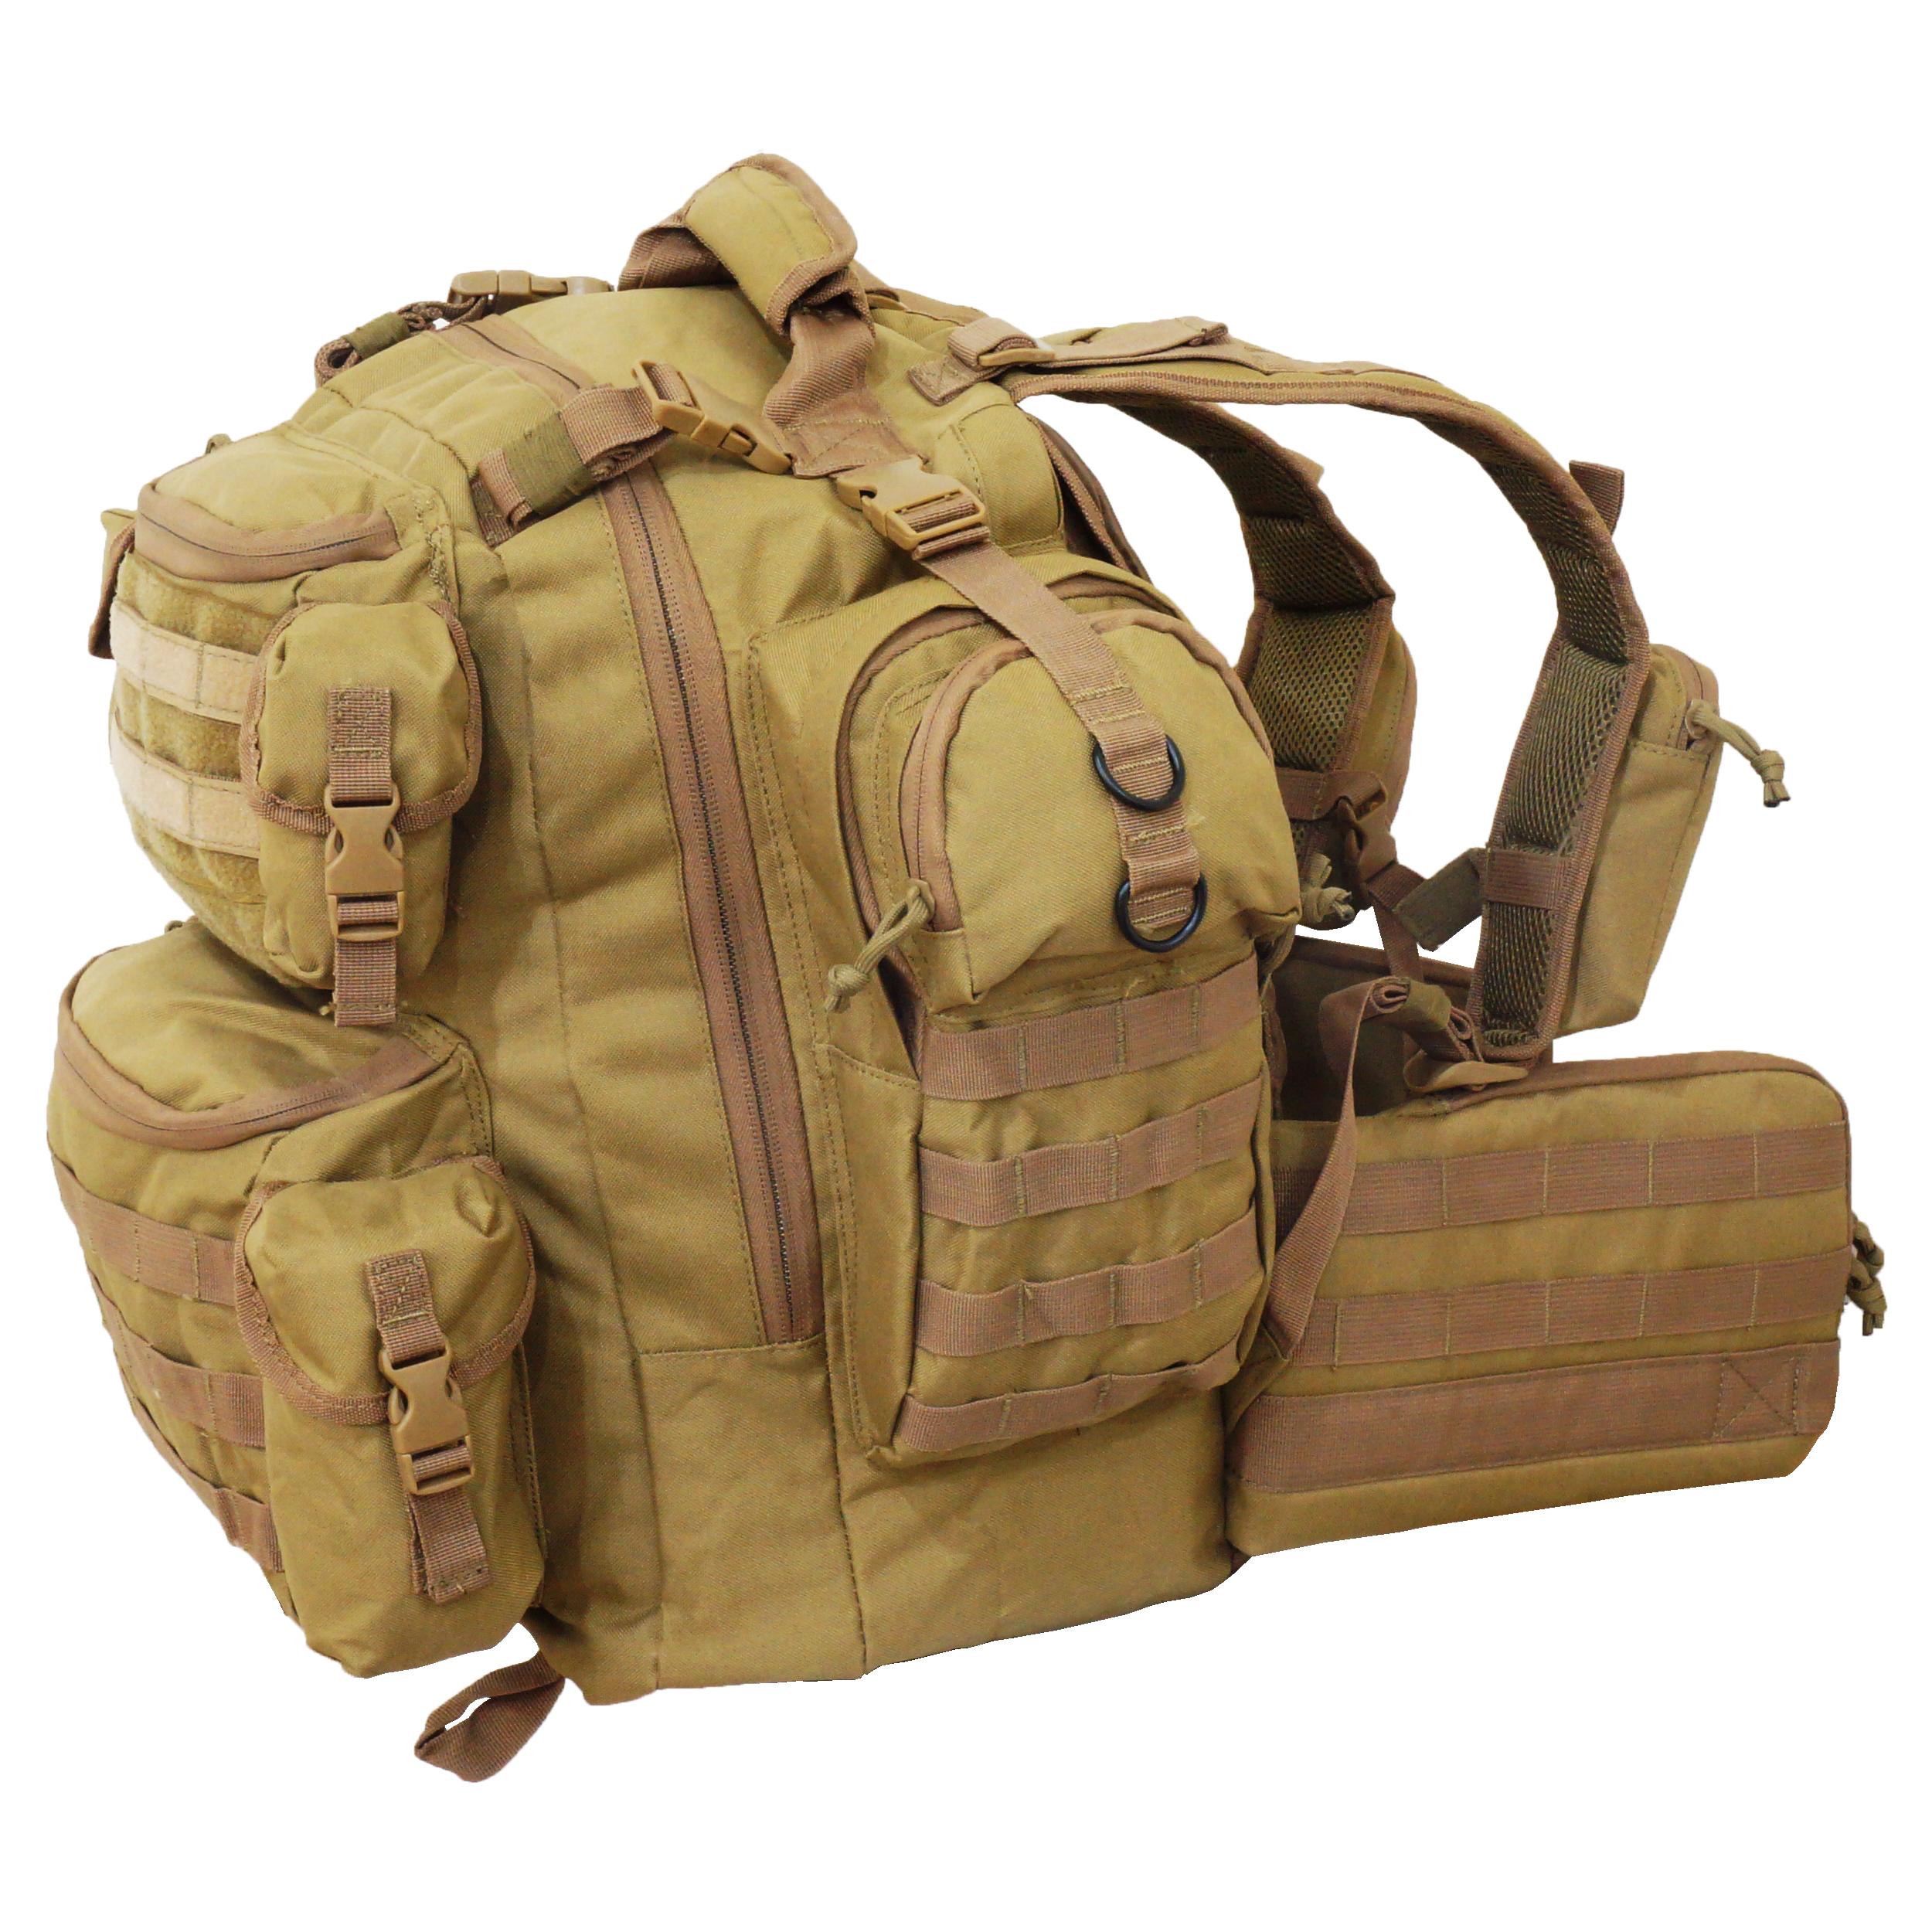 Every Day Carry Ultimate 3 Day Tactical Backpack Hydration Ready + Molle System | eBay